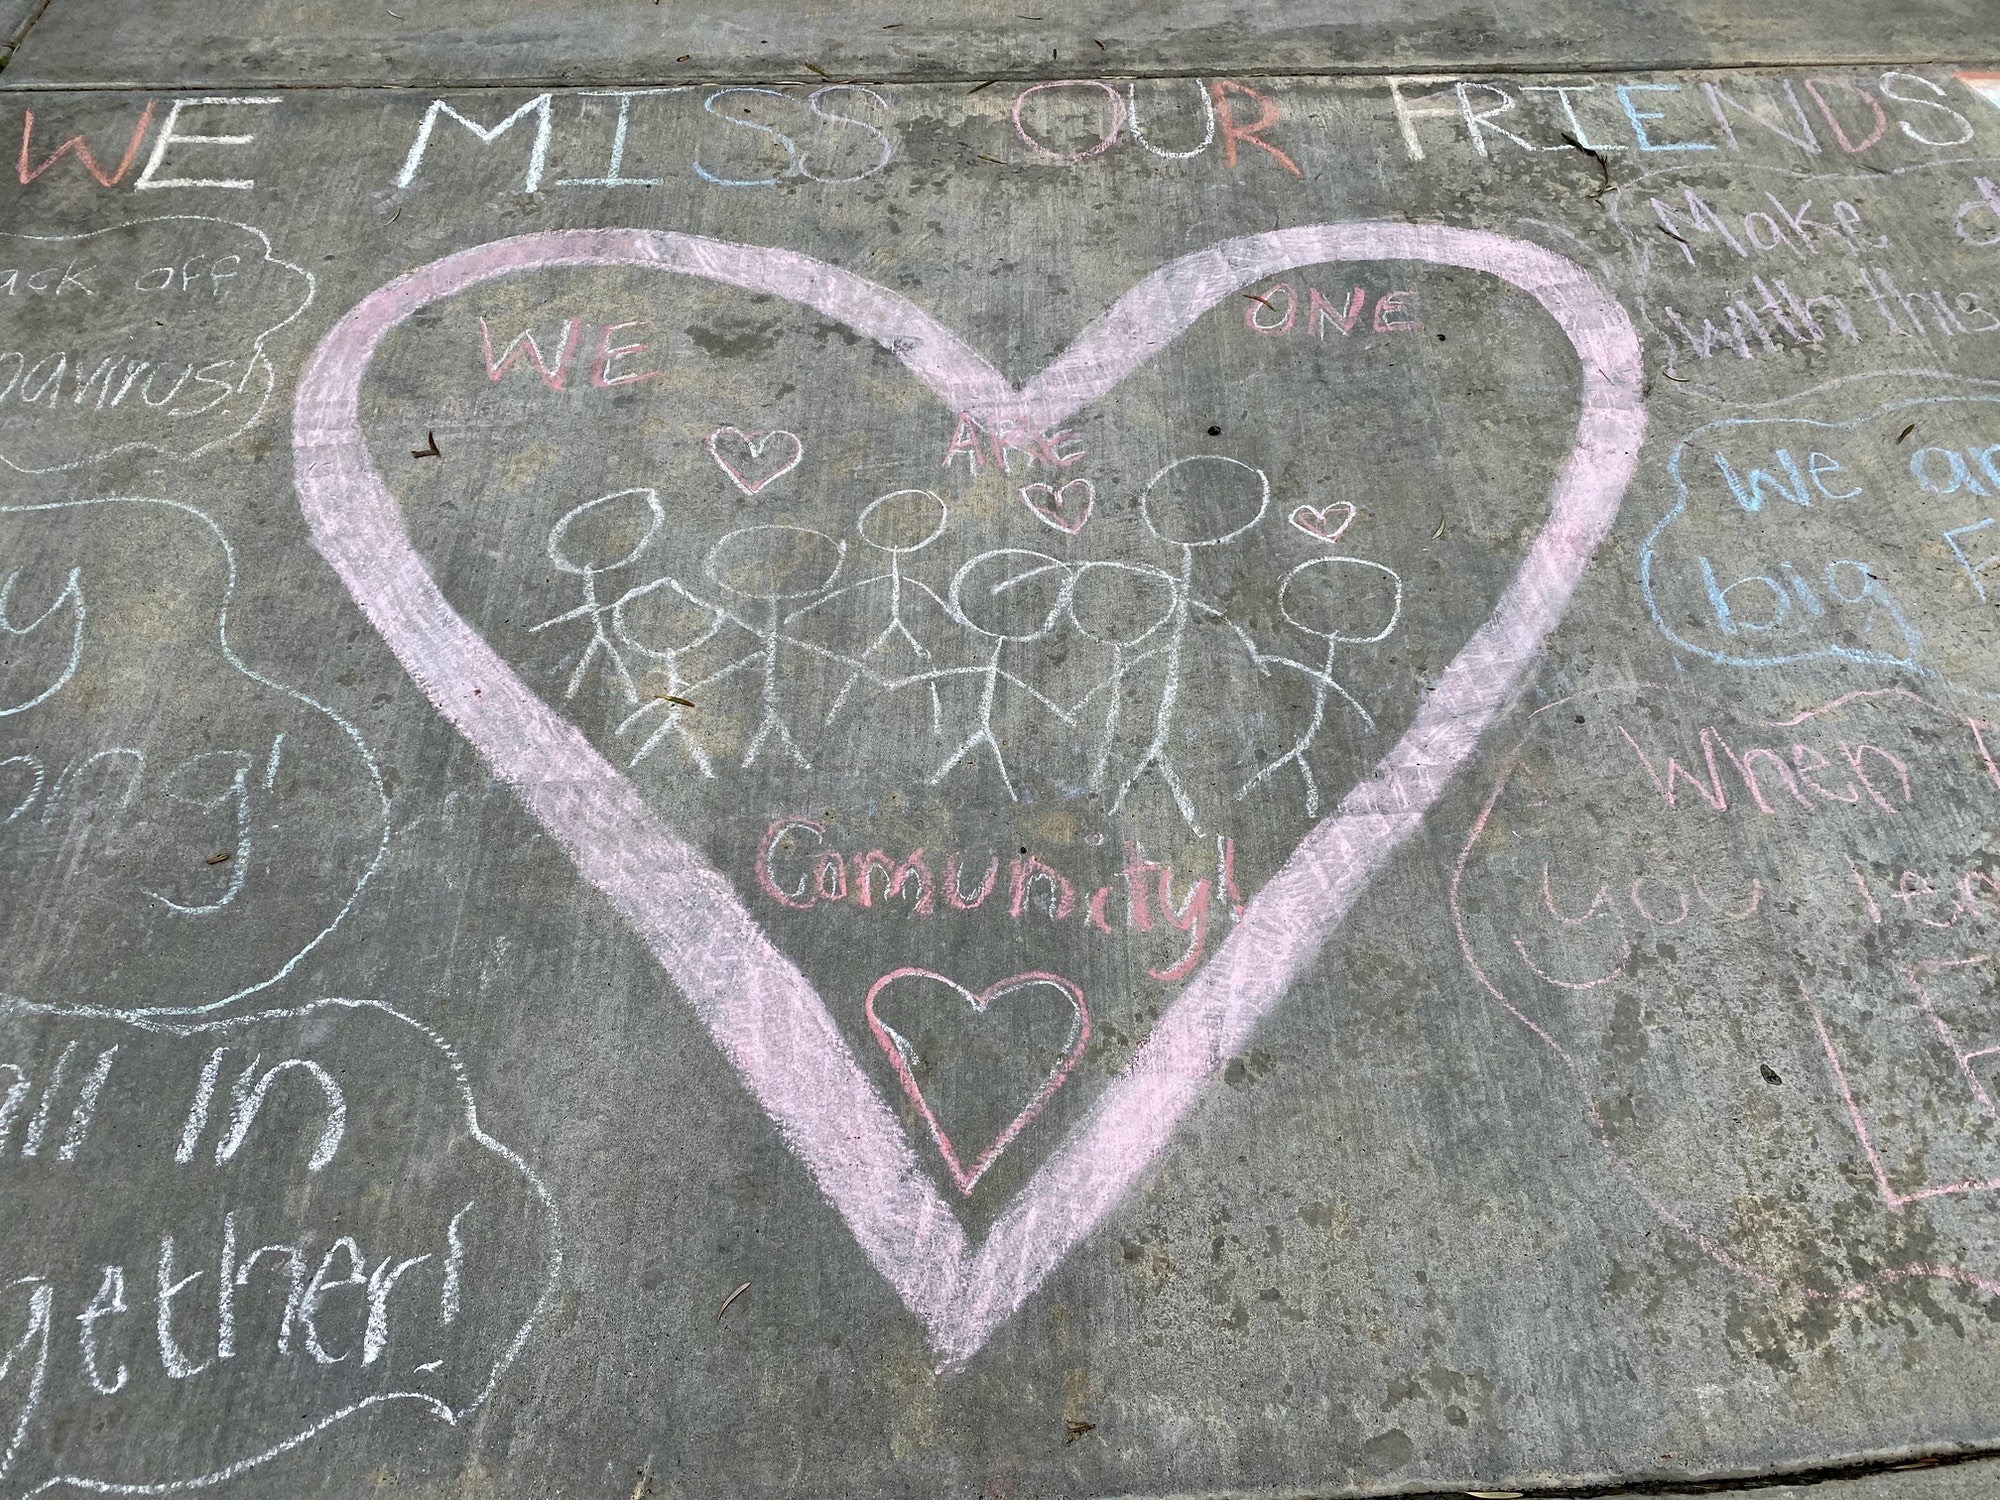 Children have drawn a heart in chalk during the pandemic and they say they miss their friends